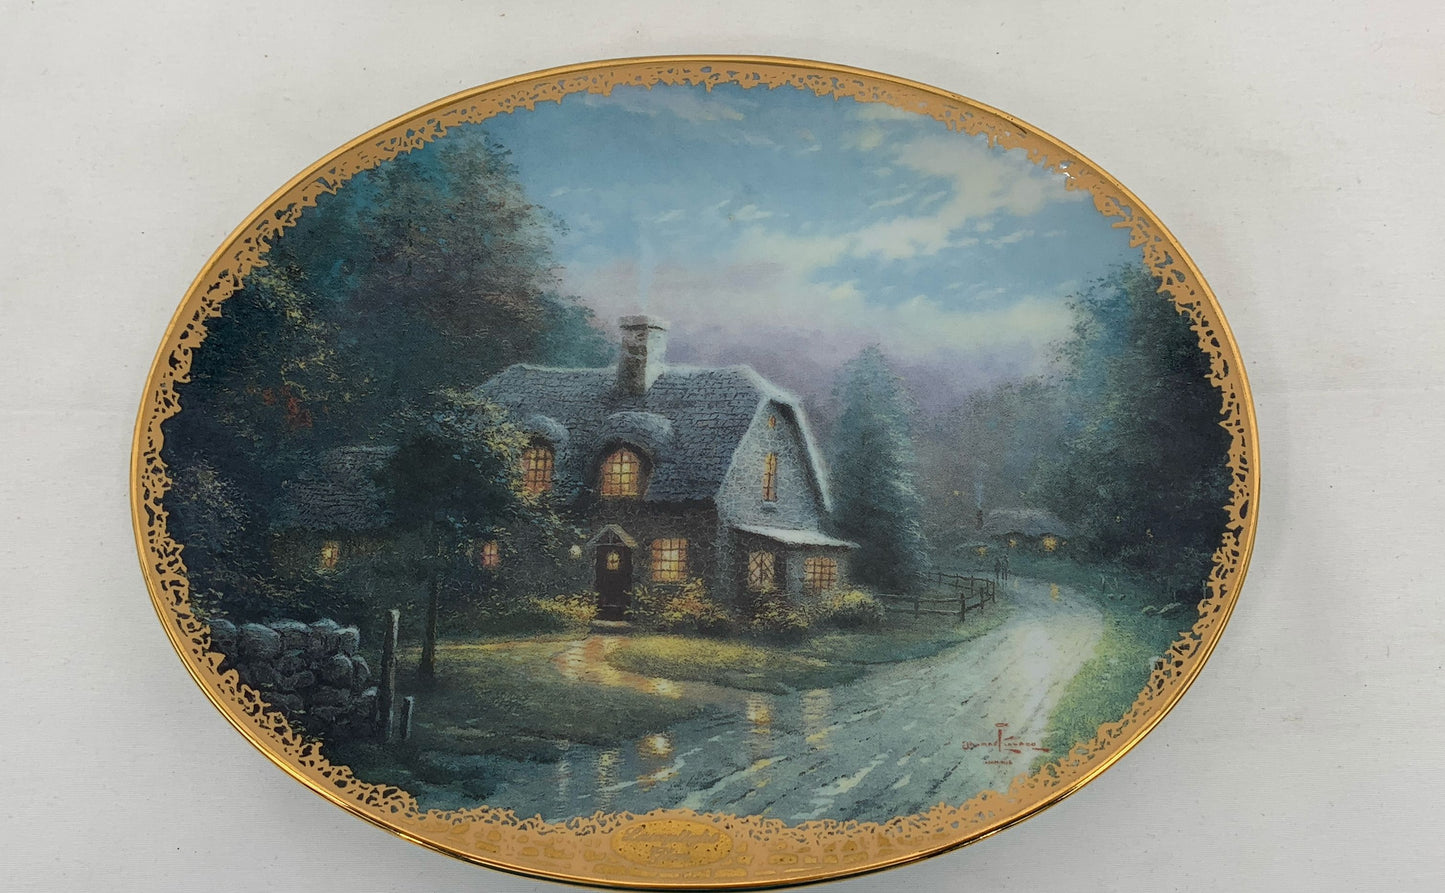 Vintage Thomas Kinkade Limited Edition Collector's Plates Lot Of 4 1990's